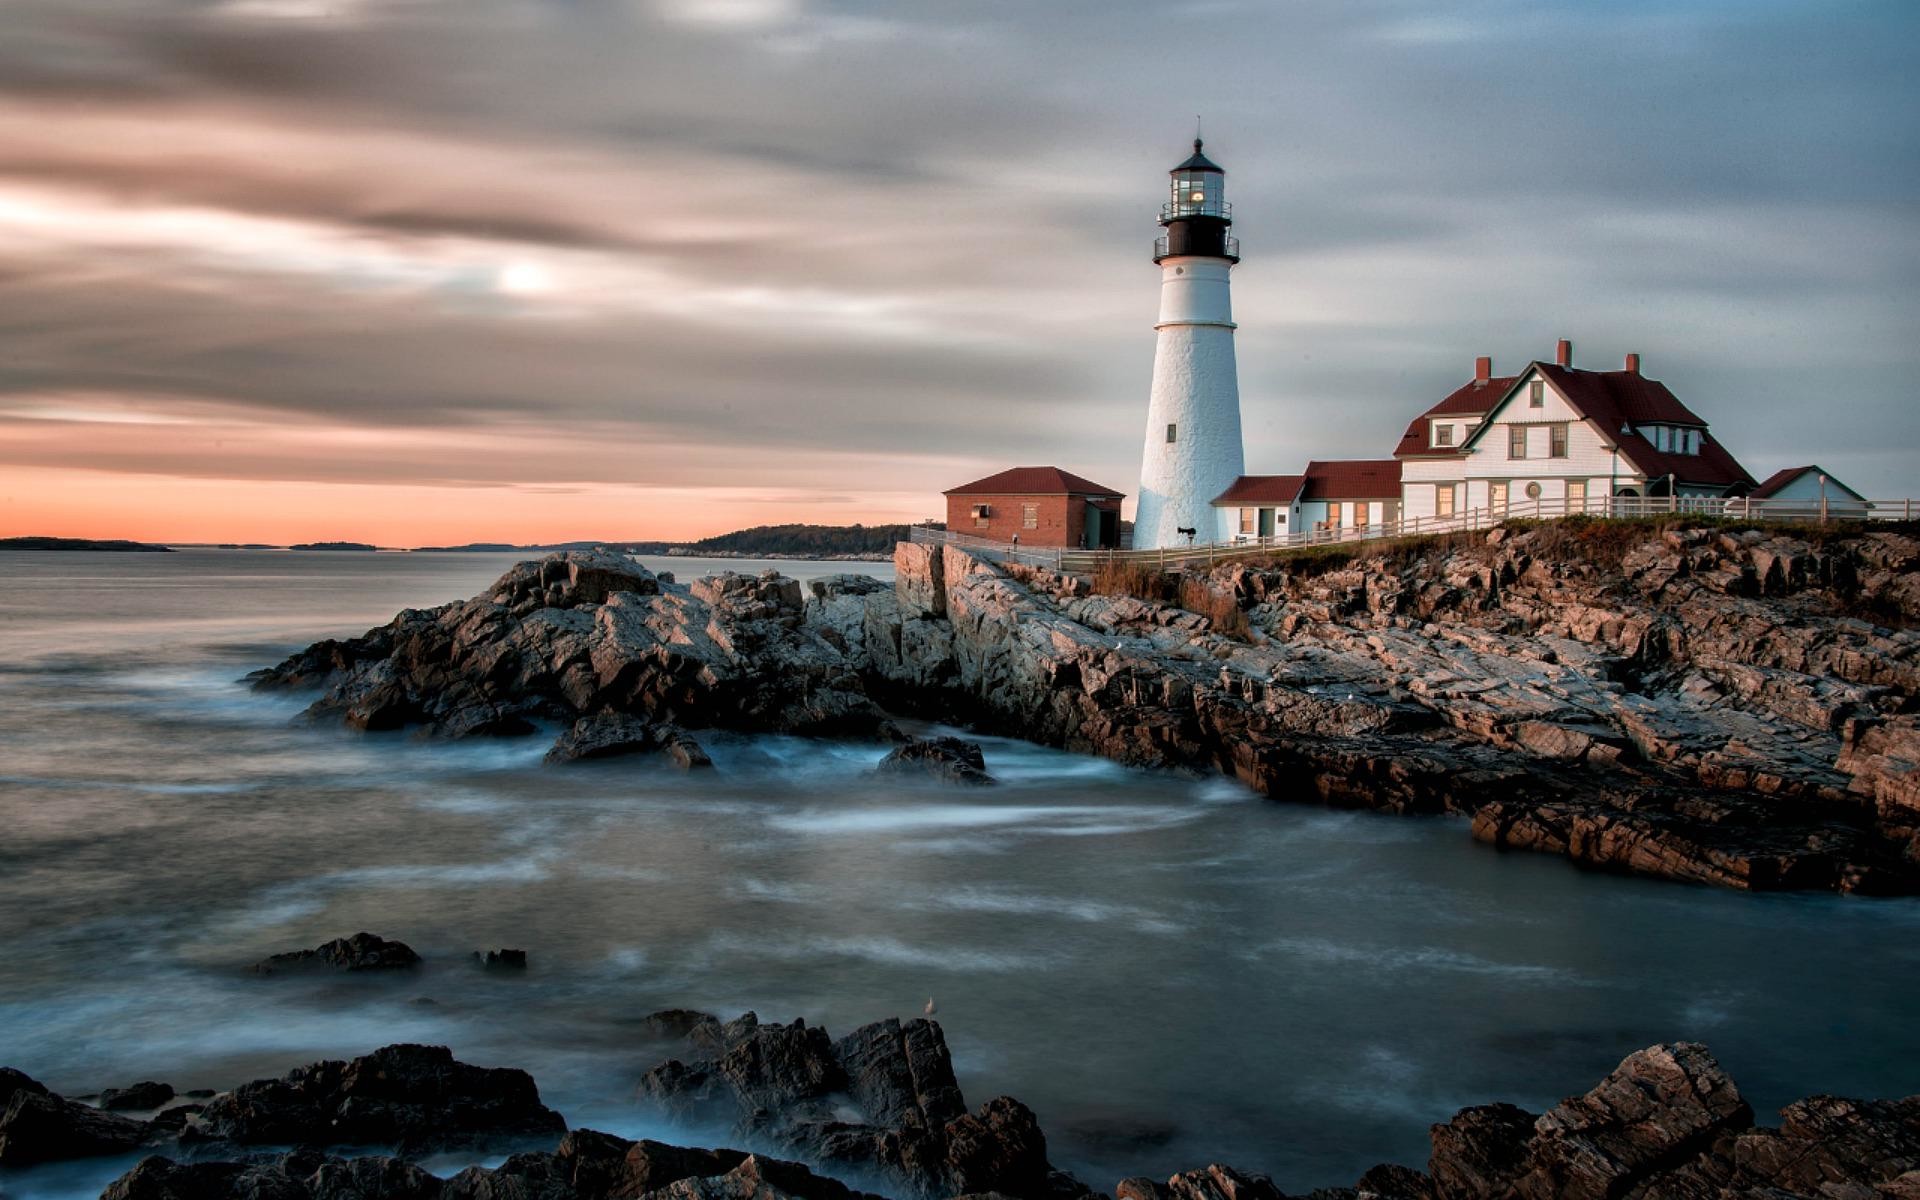 Lighthouse wallpaper related keywords – photo . Apple Support Downloads lighthouse wallpaper